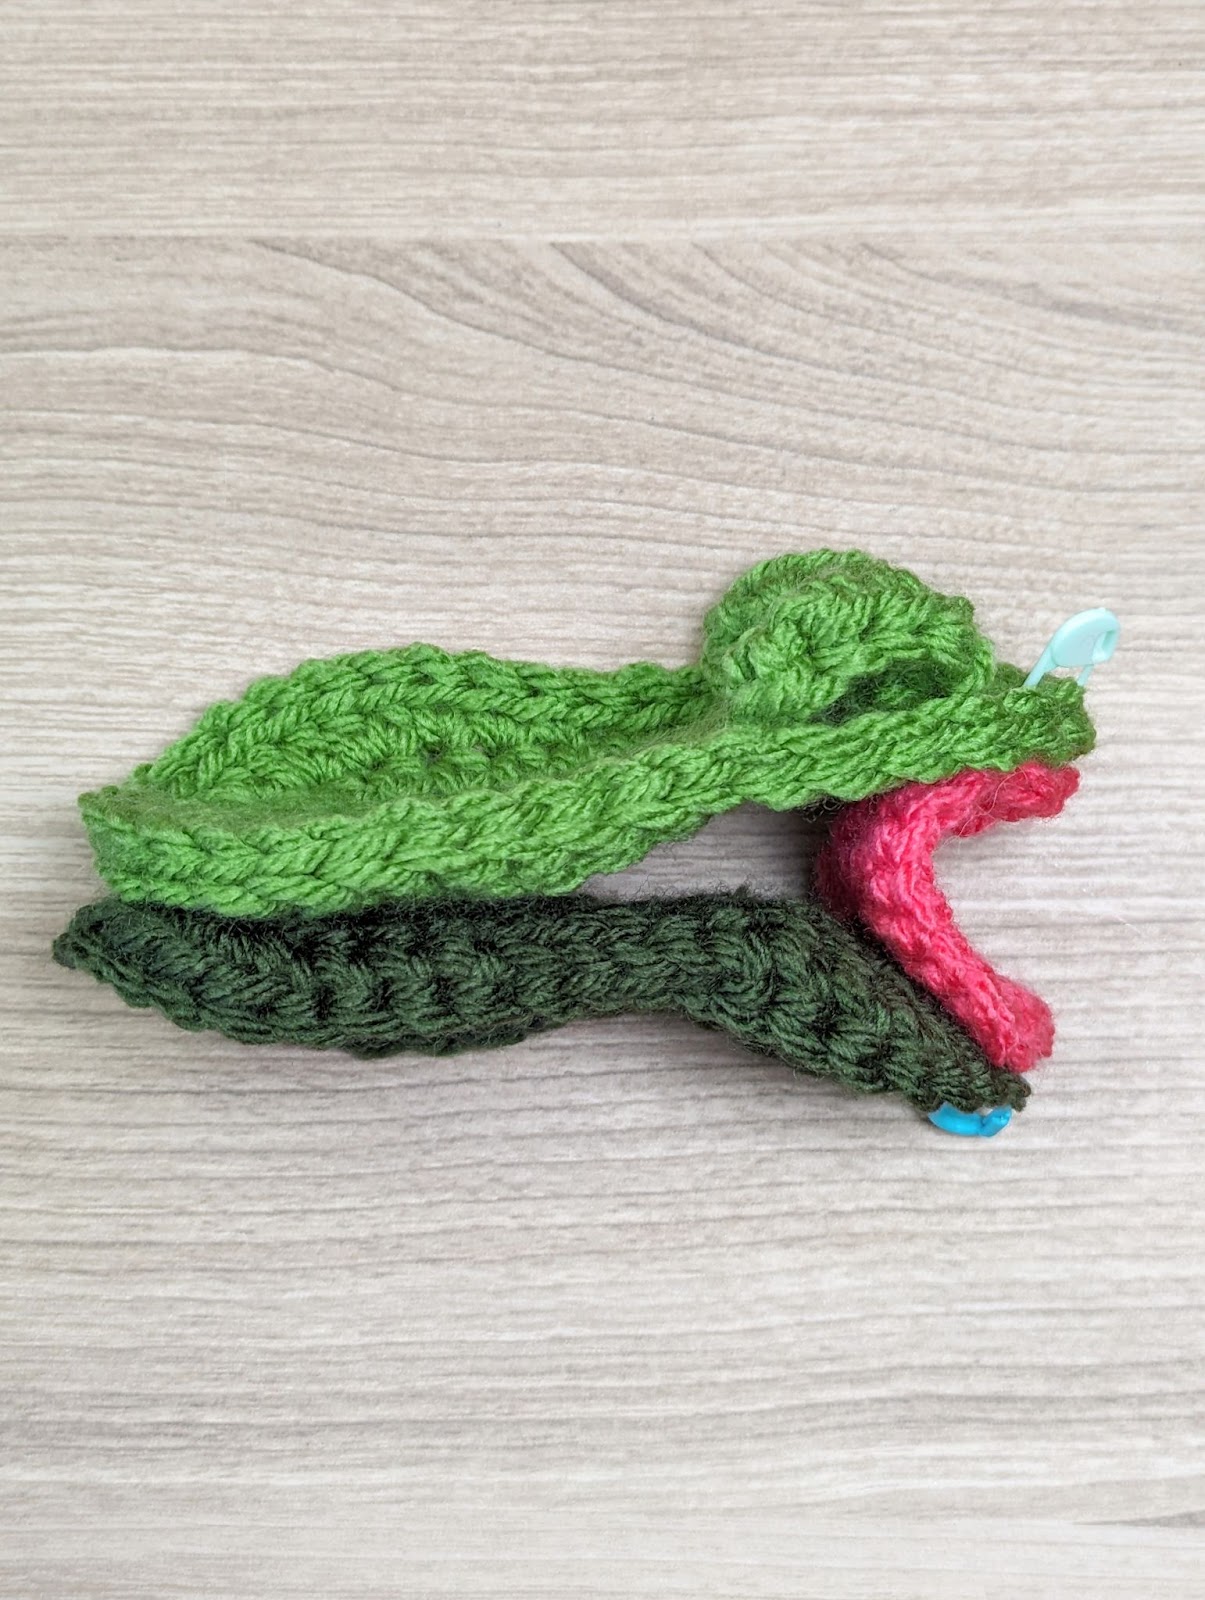 A hand-knit piece resembling the head of a frog with its mouth open, using green yarn for the head and upper jaw, darker green for the lower jaw, and pink for the mouth. The knitted object is placed on a wooden surface.